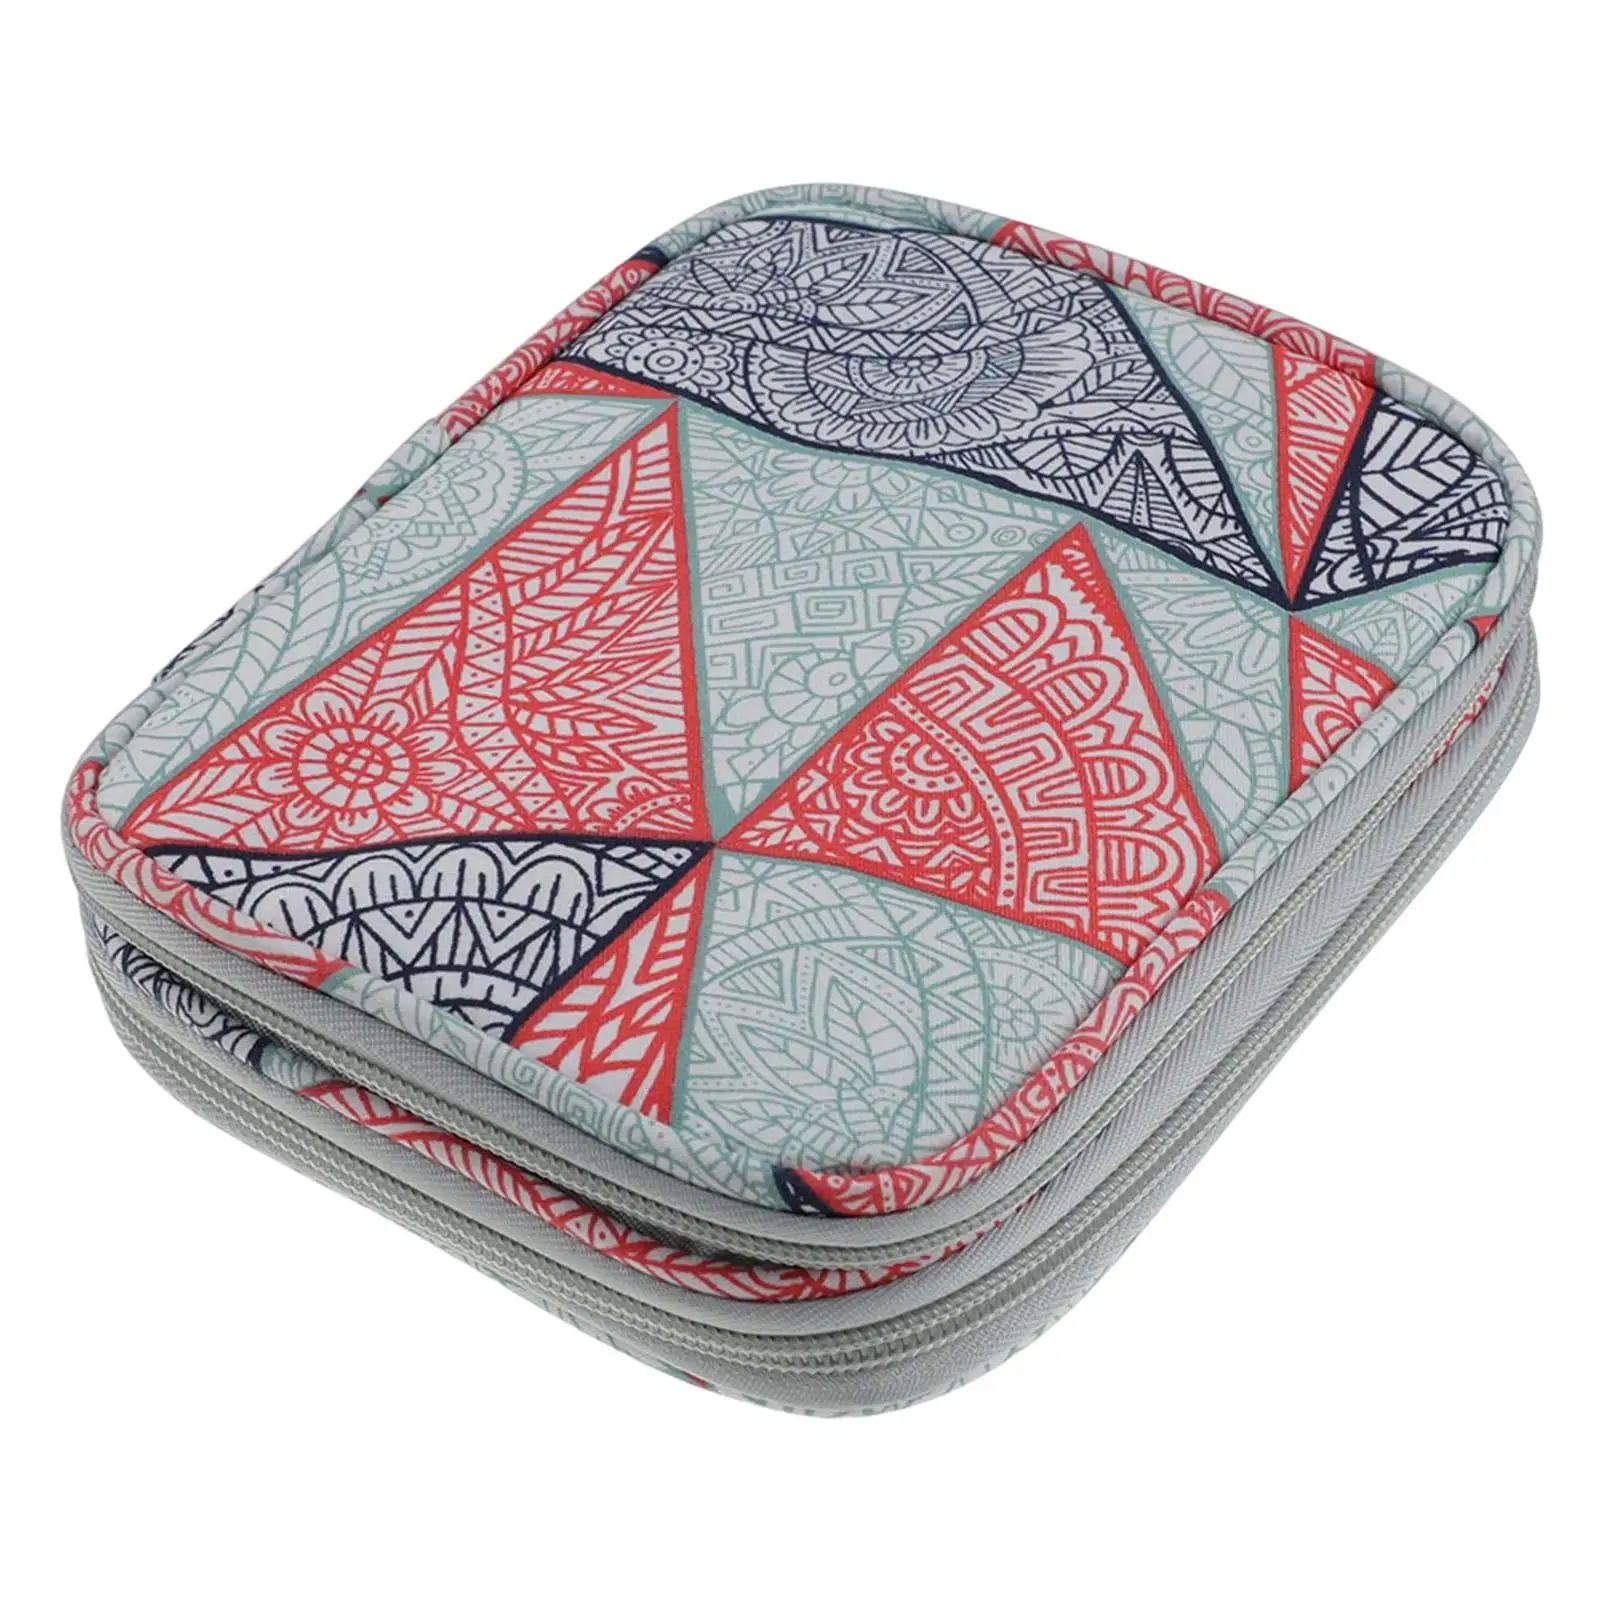 Crochet Hook Case Portable Sewing Knitting Accessories Bag Organizer